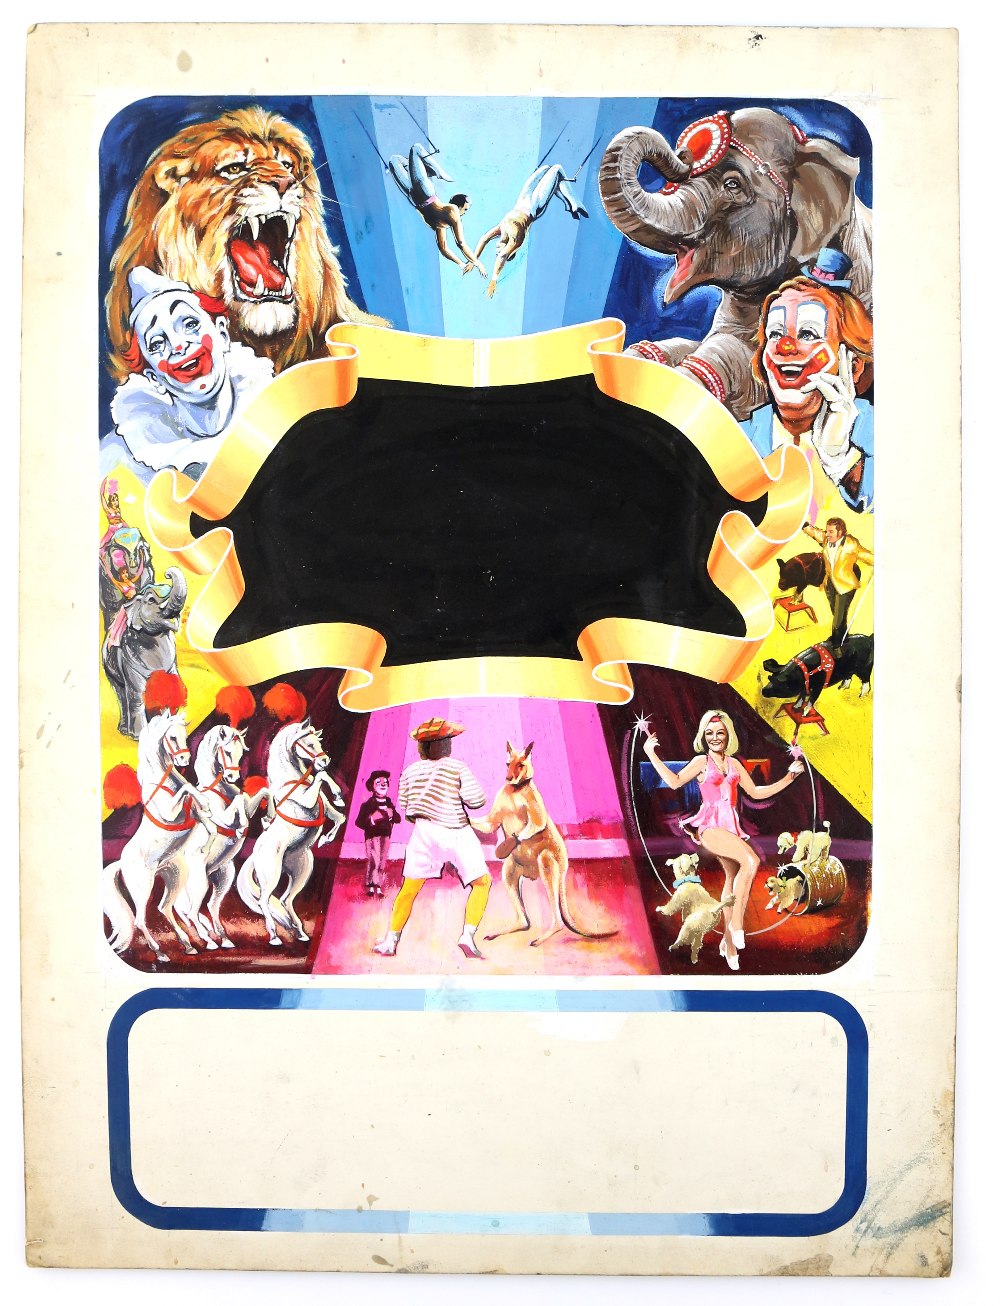 Circus artwork including horses, clowns, dogs, lion and elephant, original hand painted poster